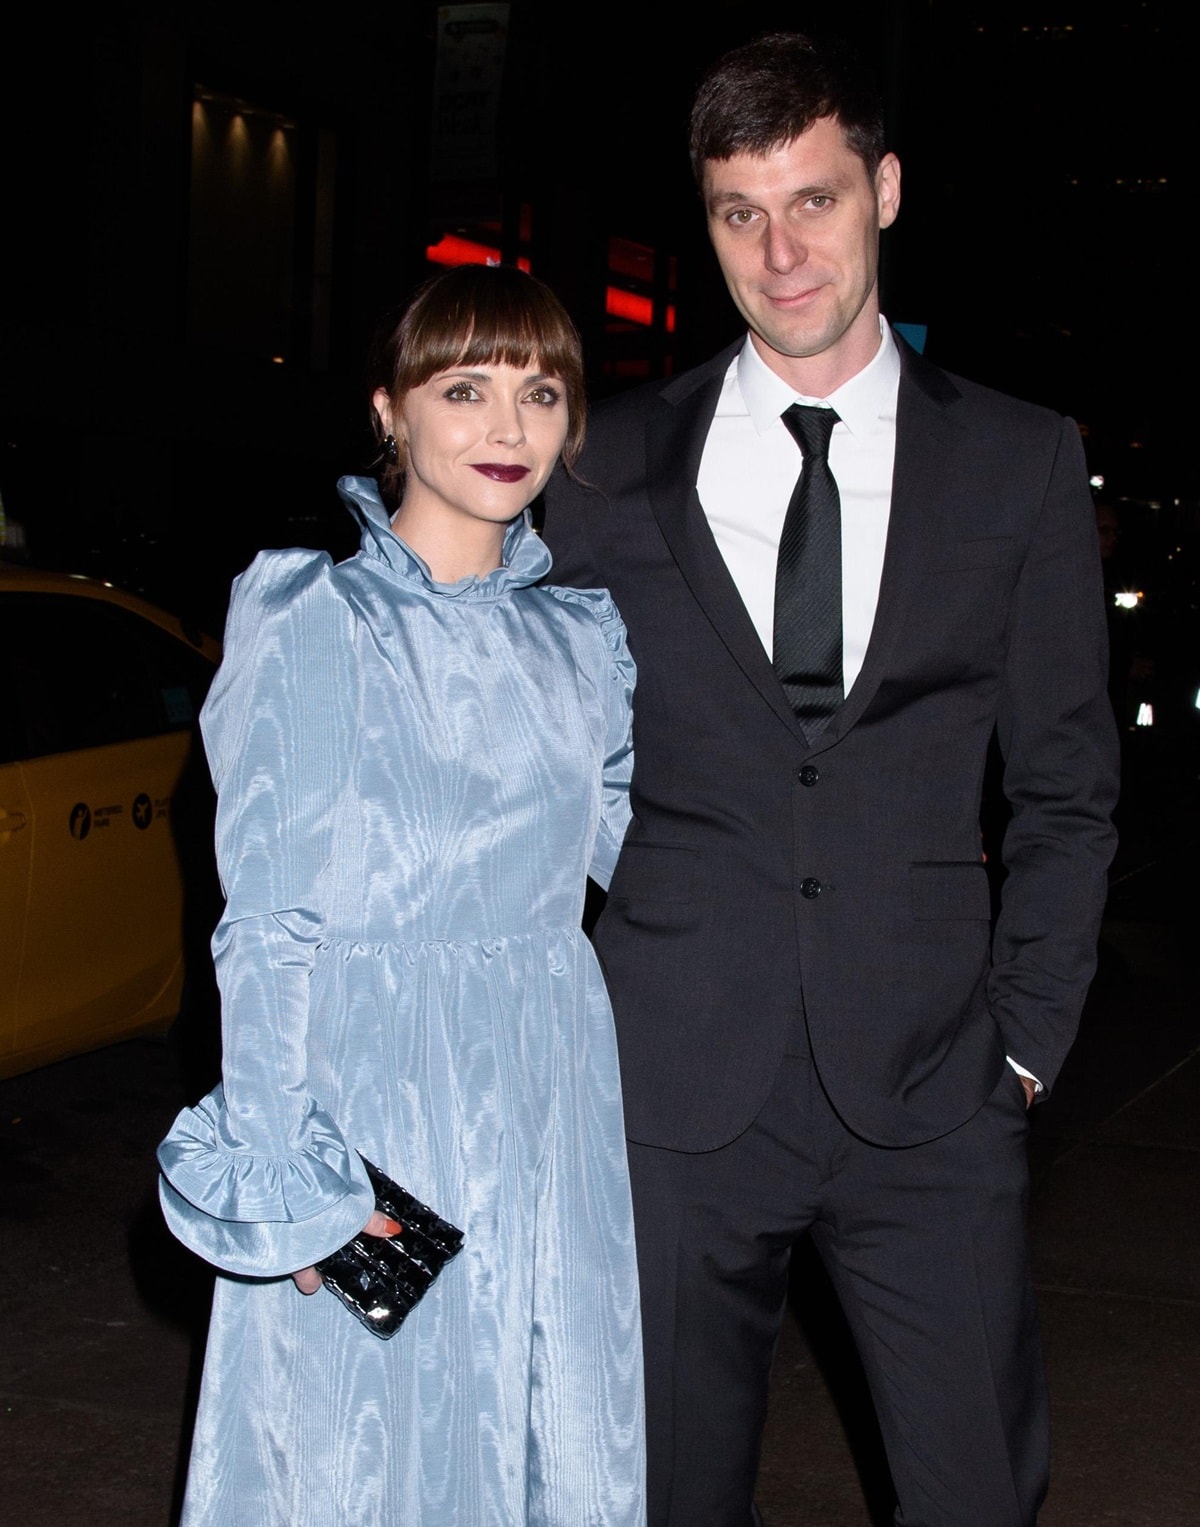 Christina Ricci and James Heerdegen were married for nearly seven years before she filed for divorce in July 2020